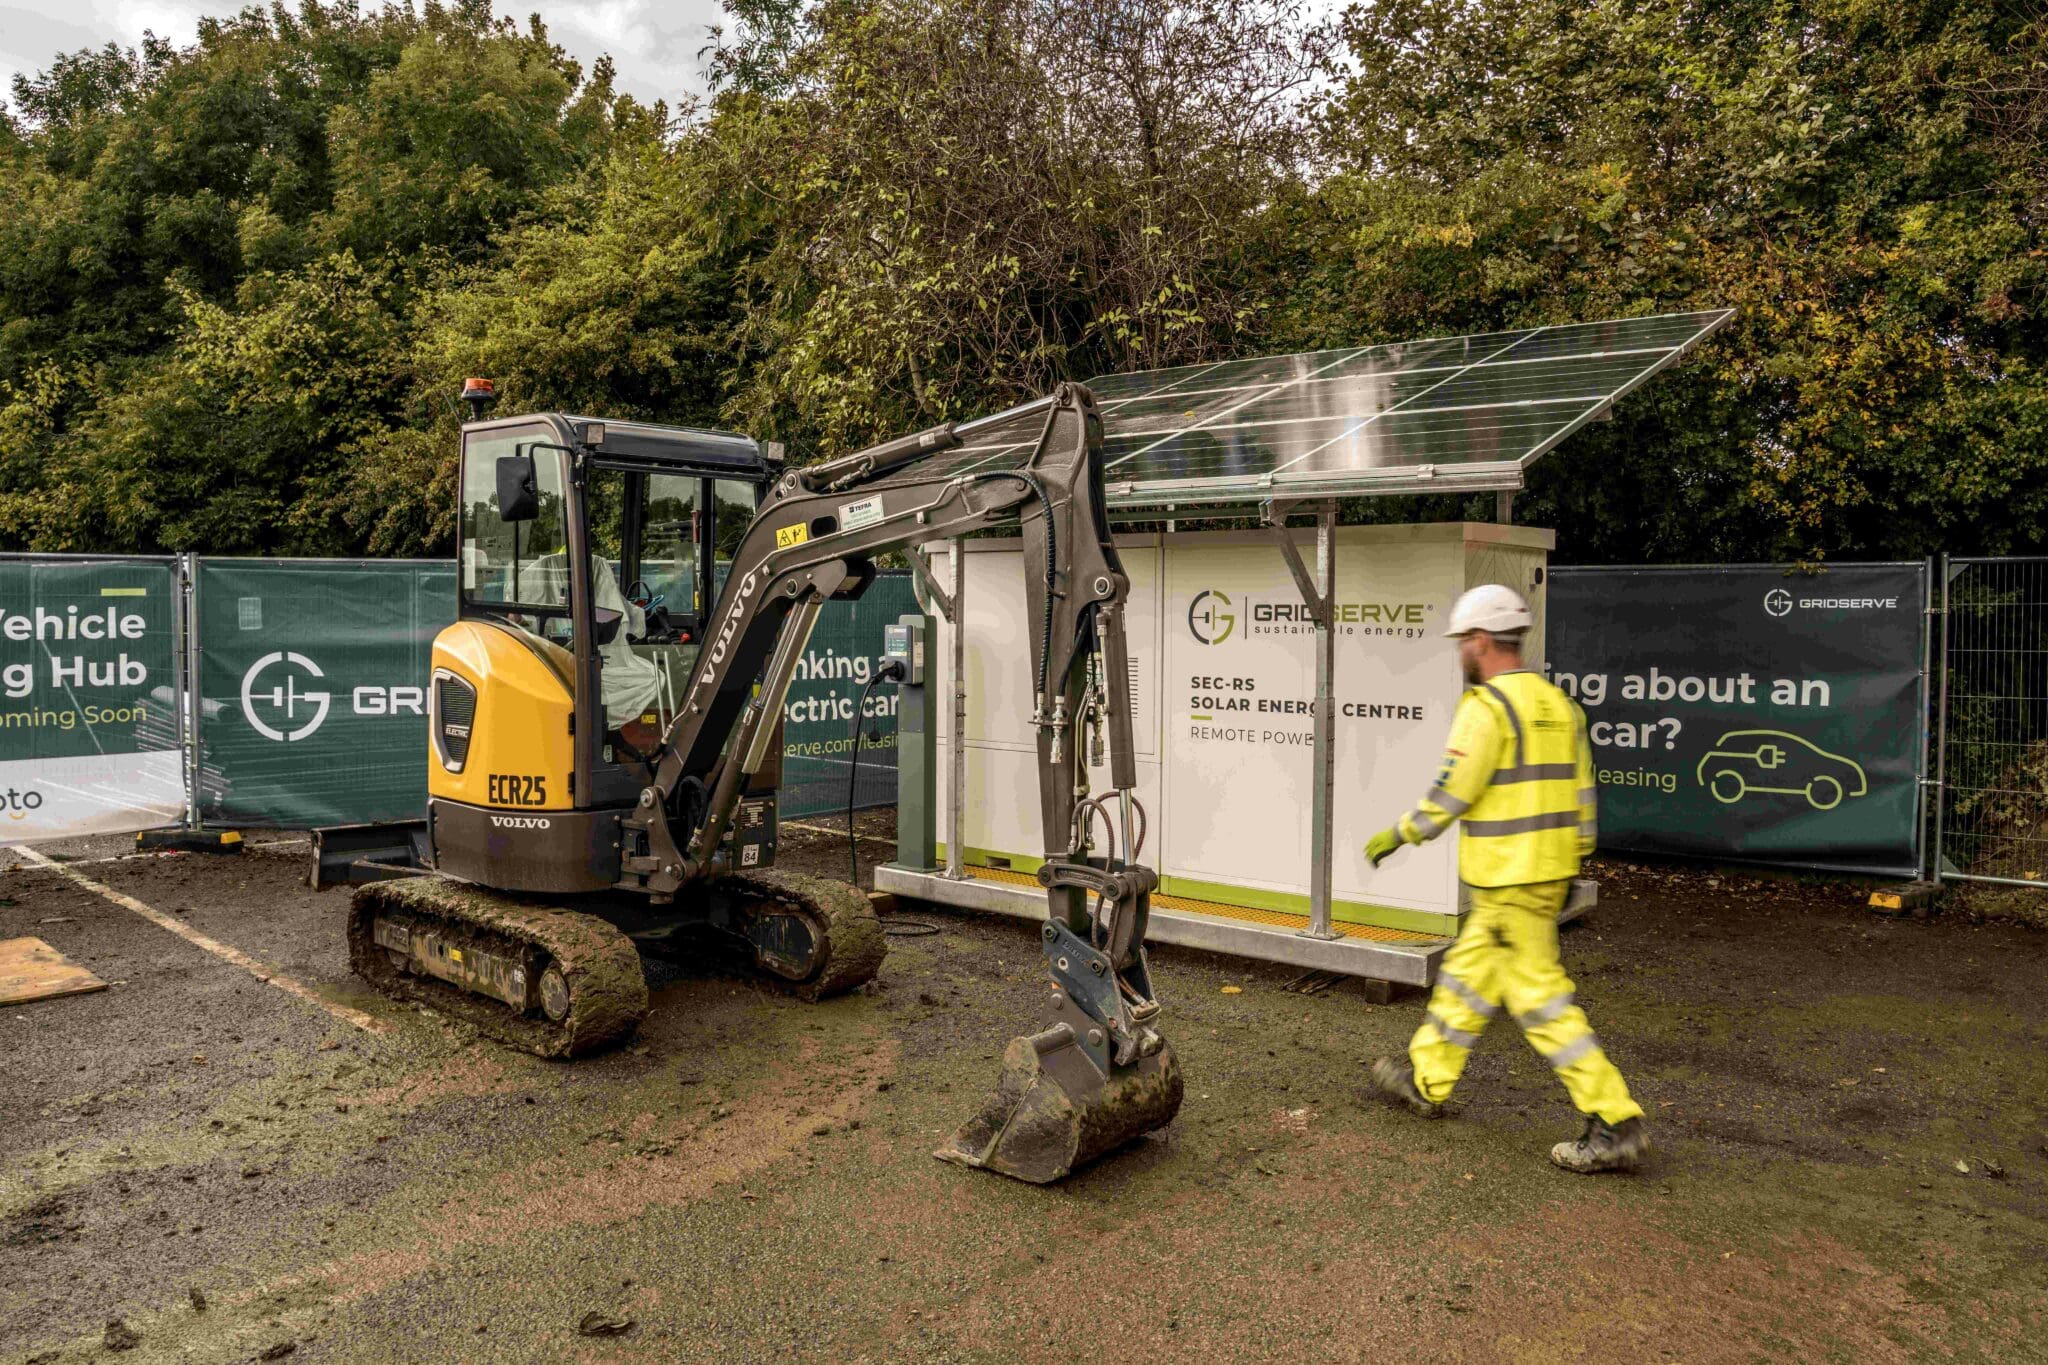 Fully-electric excavator powered by a GRIDSERVE Solar Energy Centre